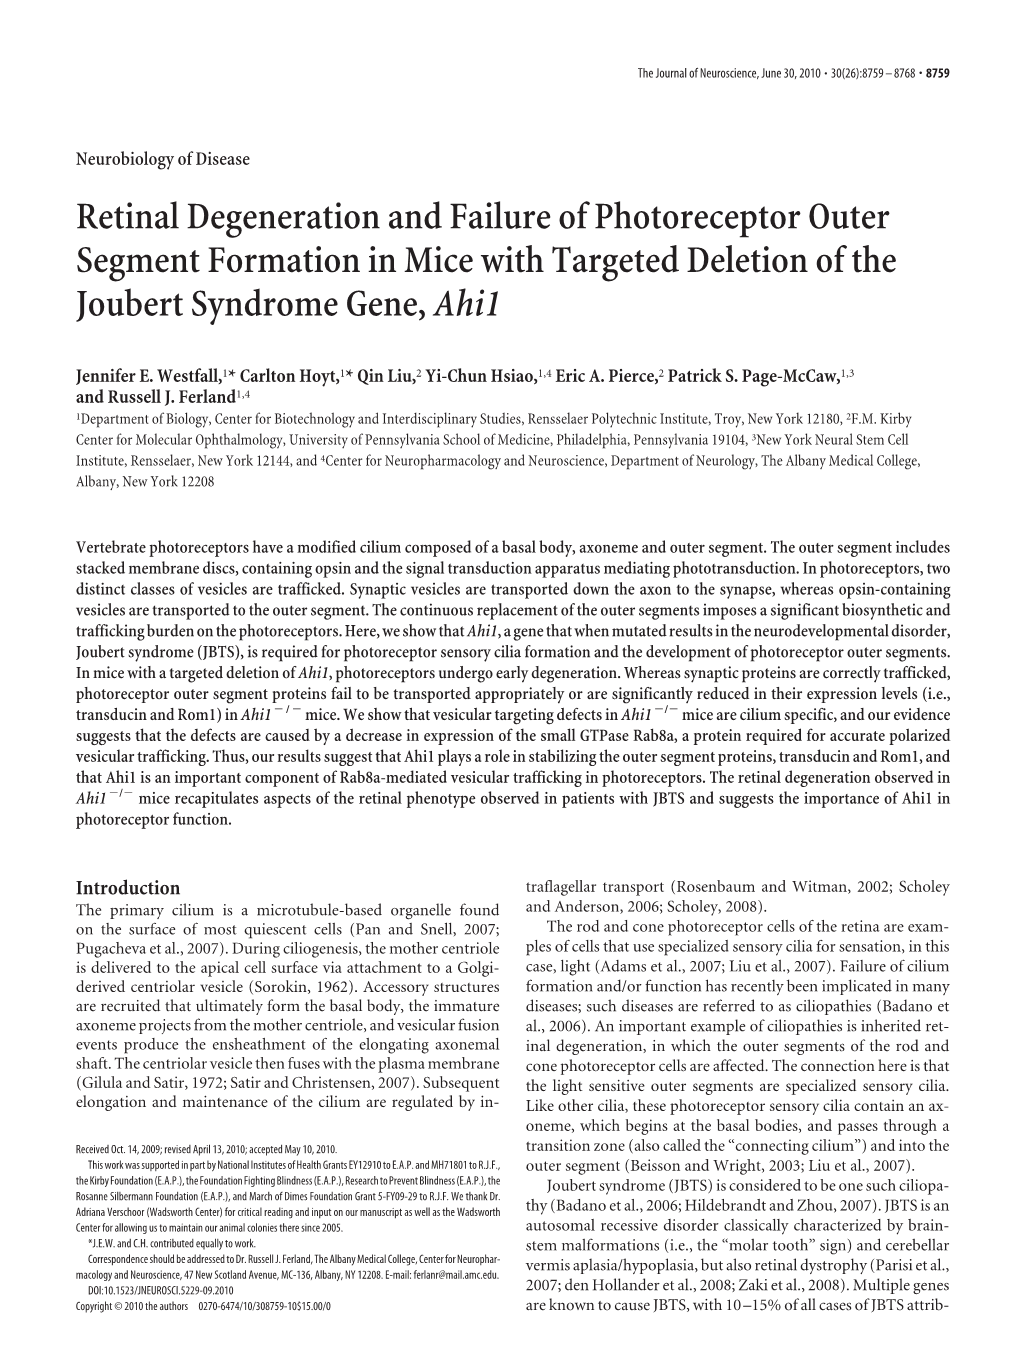 Retinal Degeneration and Failure of Photoreceptor Outer Segment Formation in Mice with Targeted Deletion of the Joubert Syndrome Gene, Ahi1